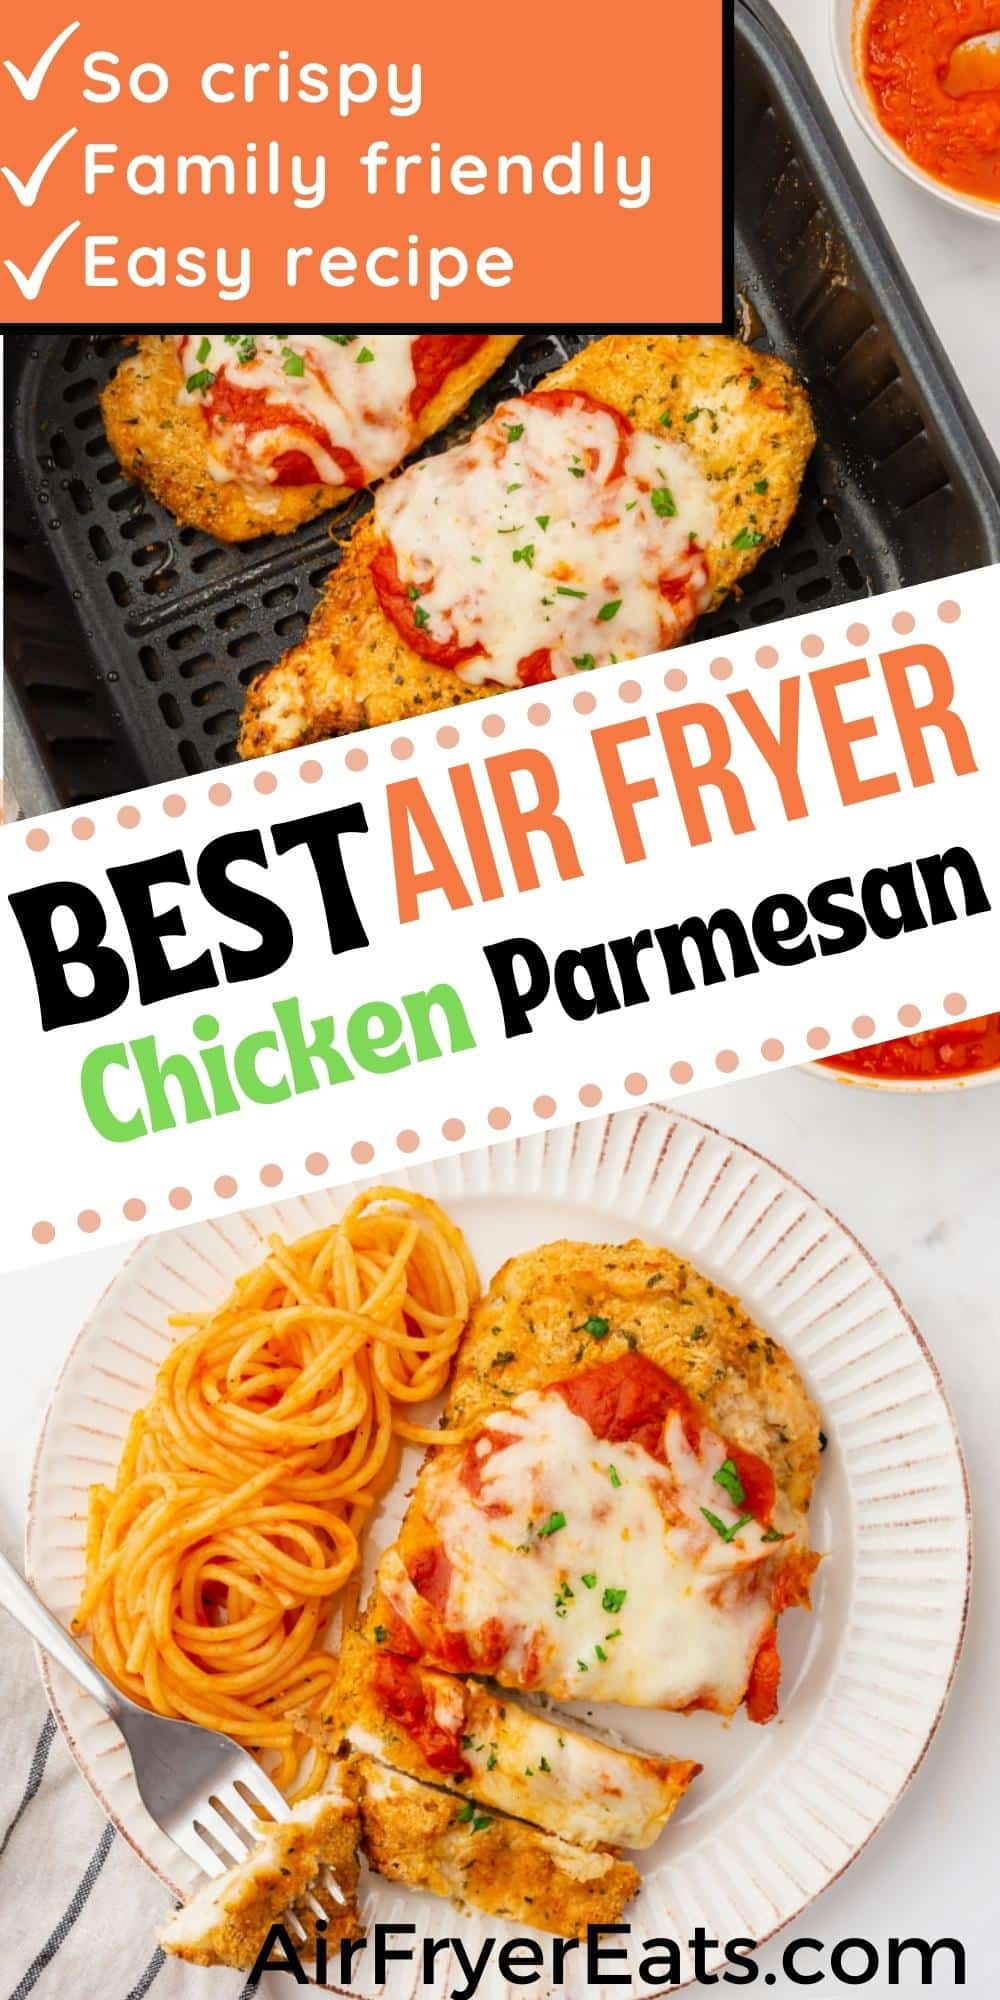 Learn how to make the best Air Fryer Chicken Parmesan! It's crispy, cheesy, and packed with Italian flavor. Plus, it's ready in less than 15 minutes, making it perfect for busy nights. via @vegetarianmamma